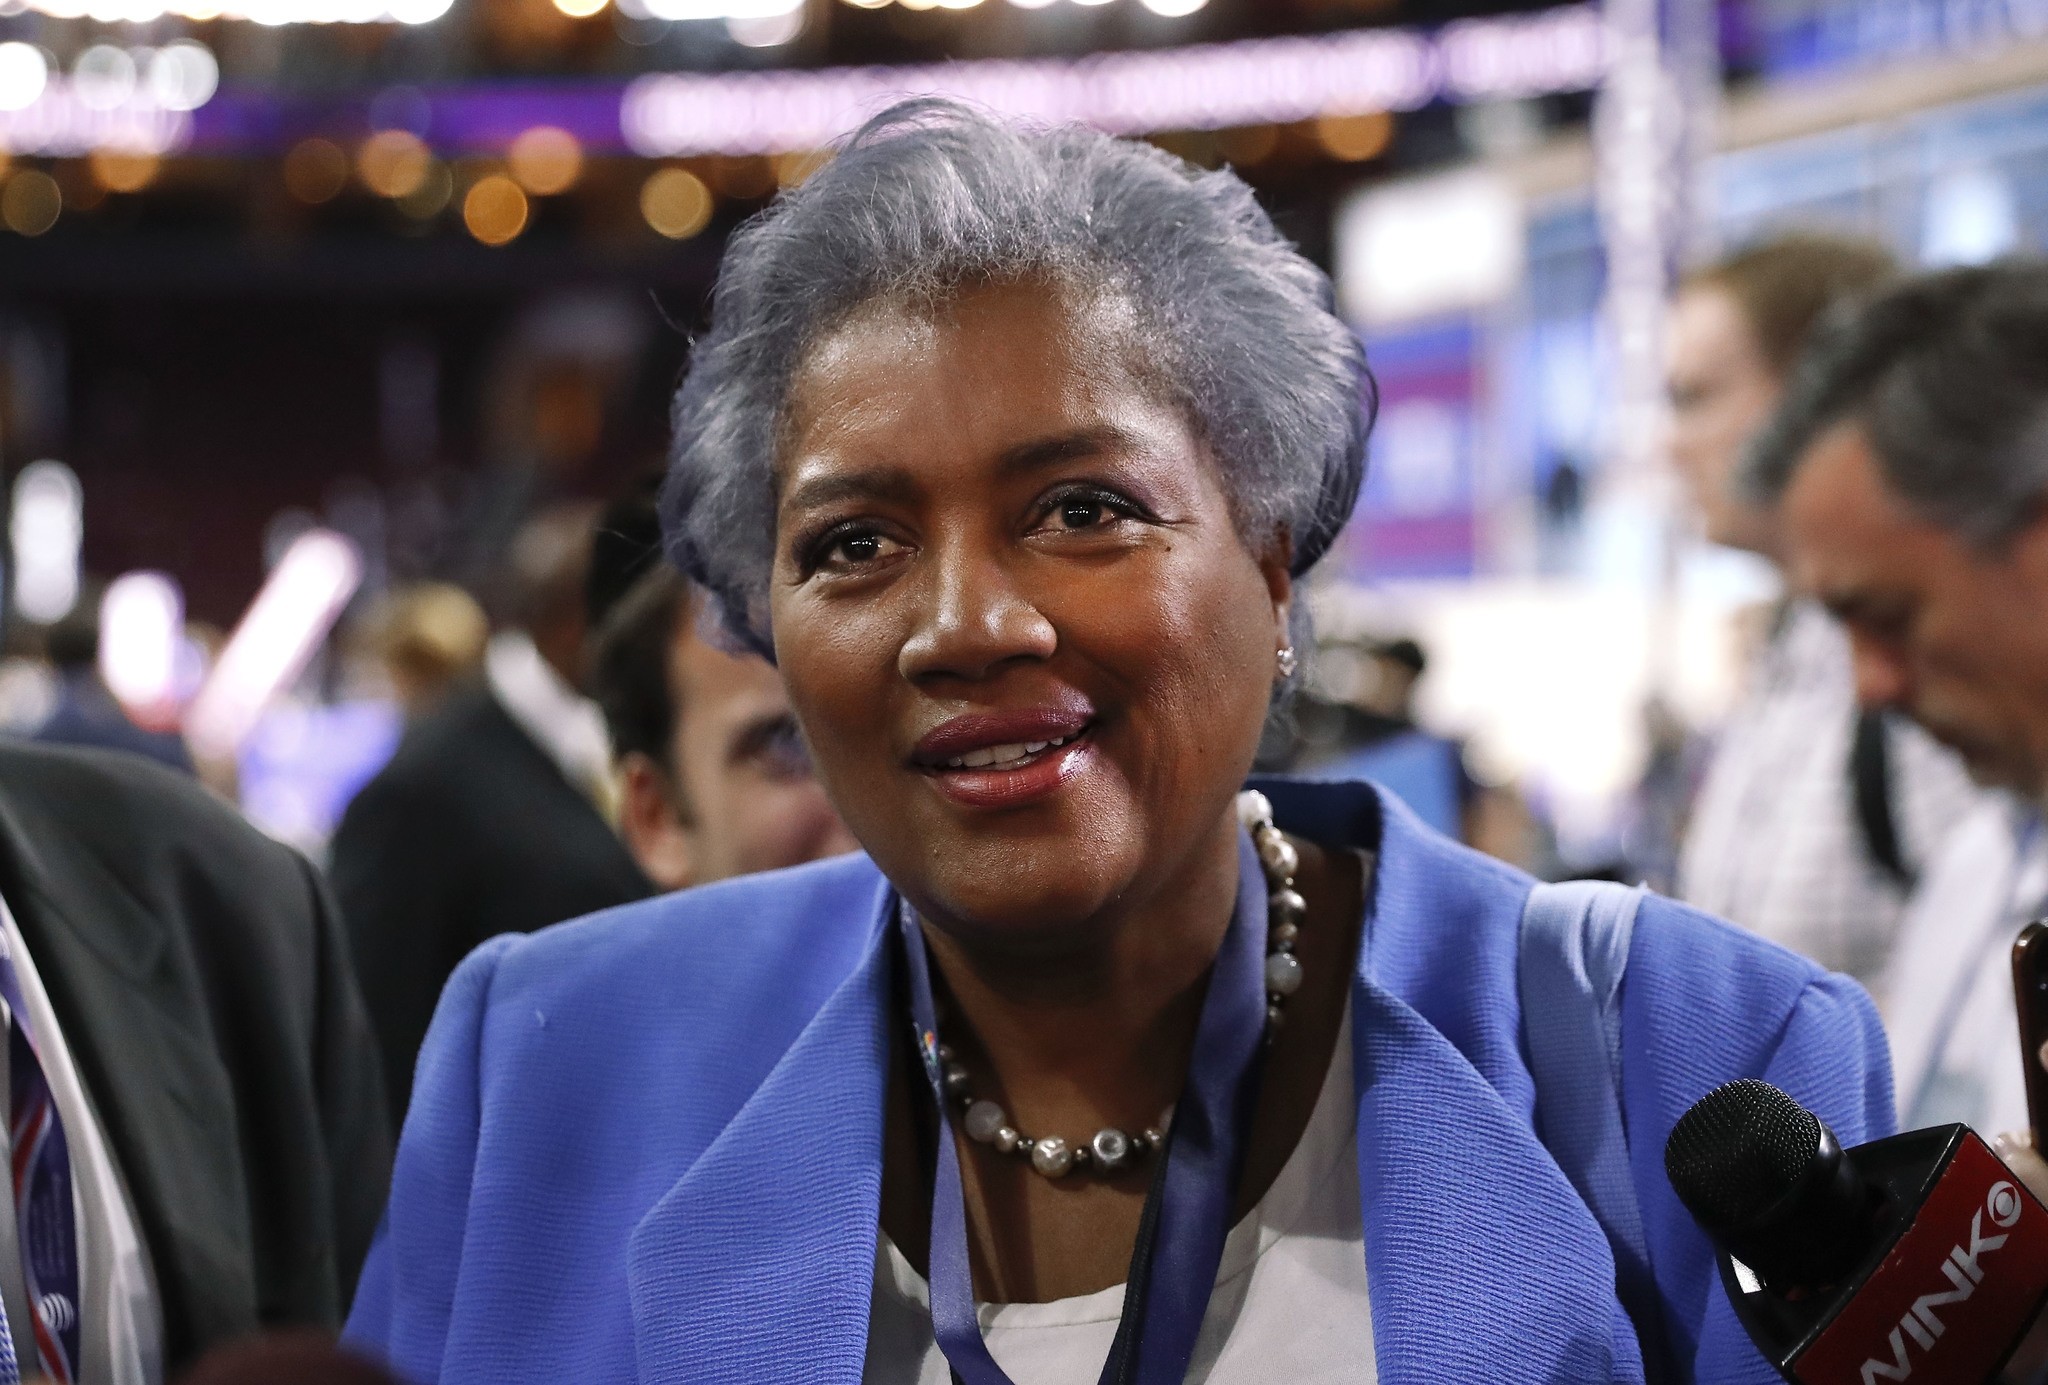 Donna Brazile, interim chair of the Democratic National Committee, appears on the floor of the Democratic National Convention in Philadelphia. (AP Photo)